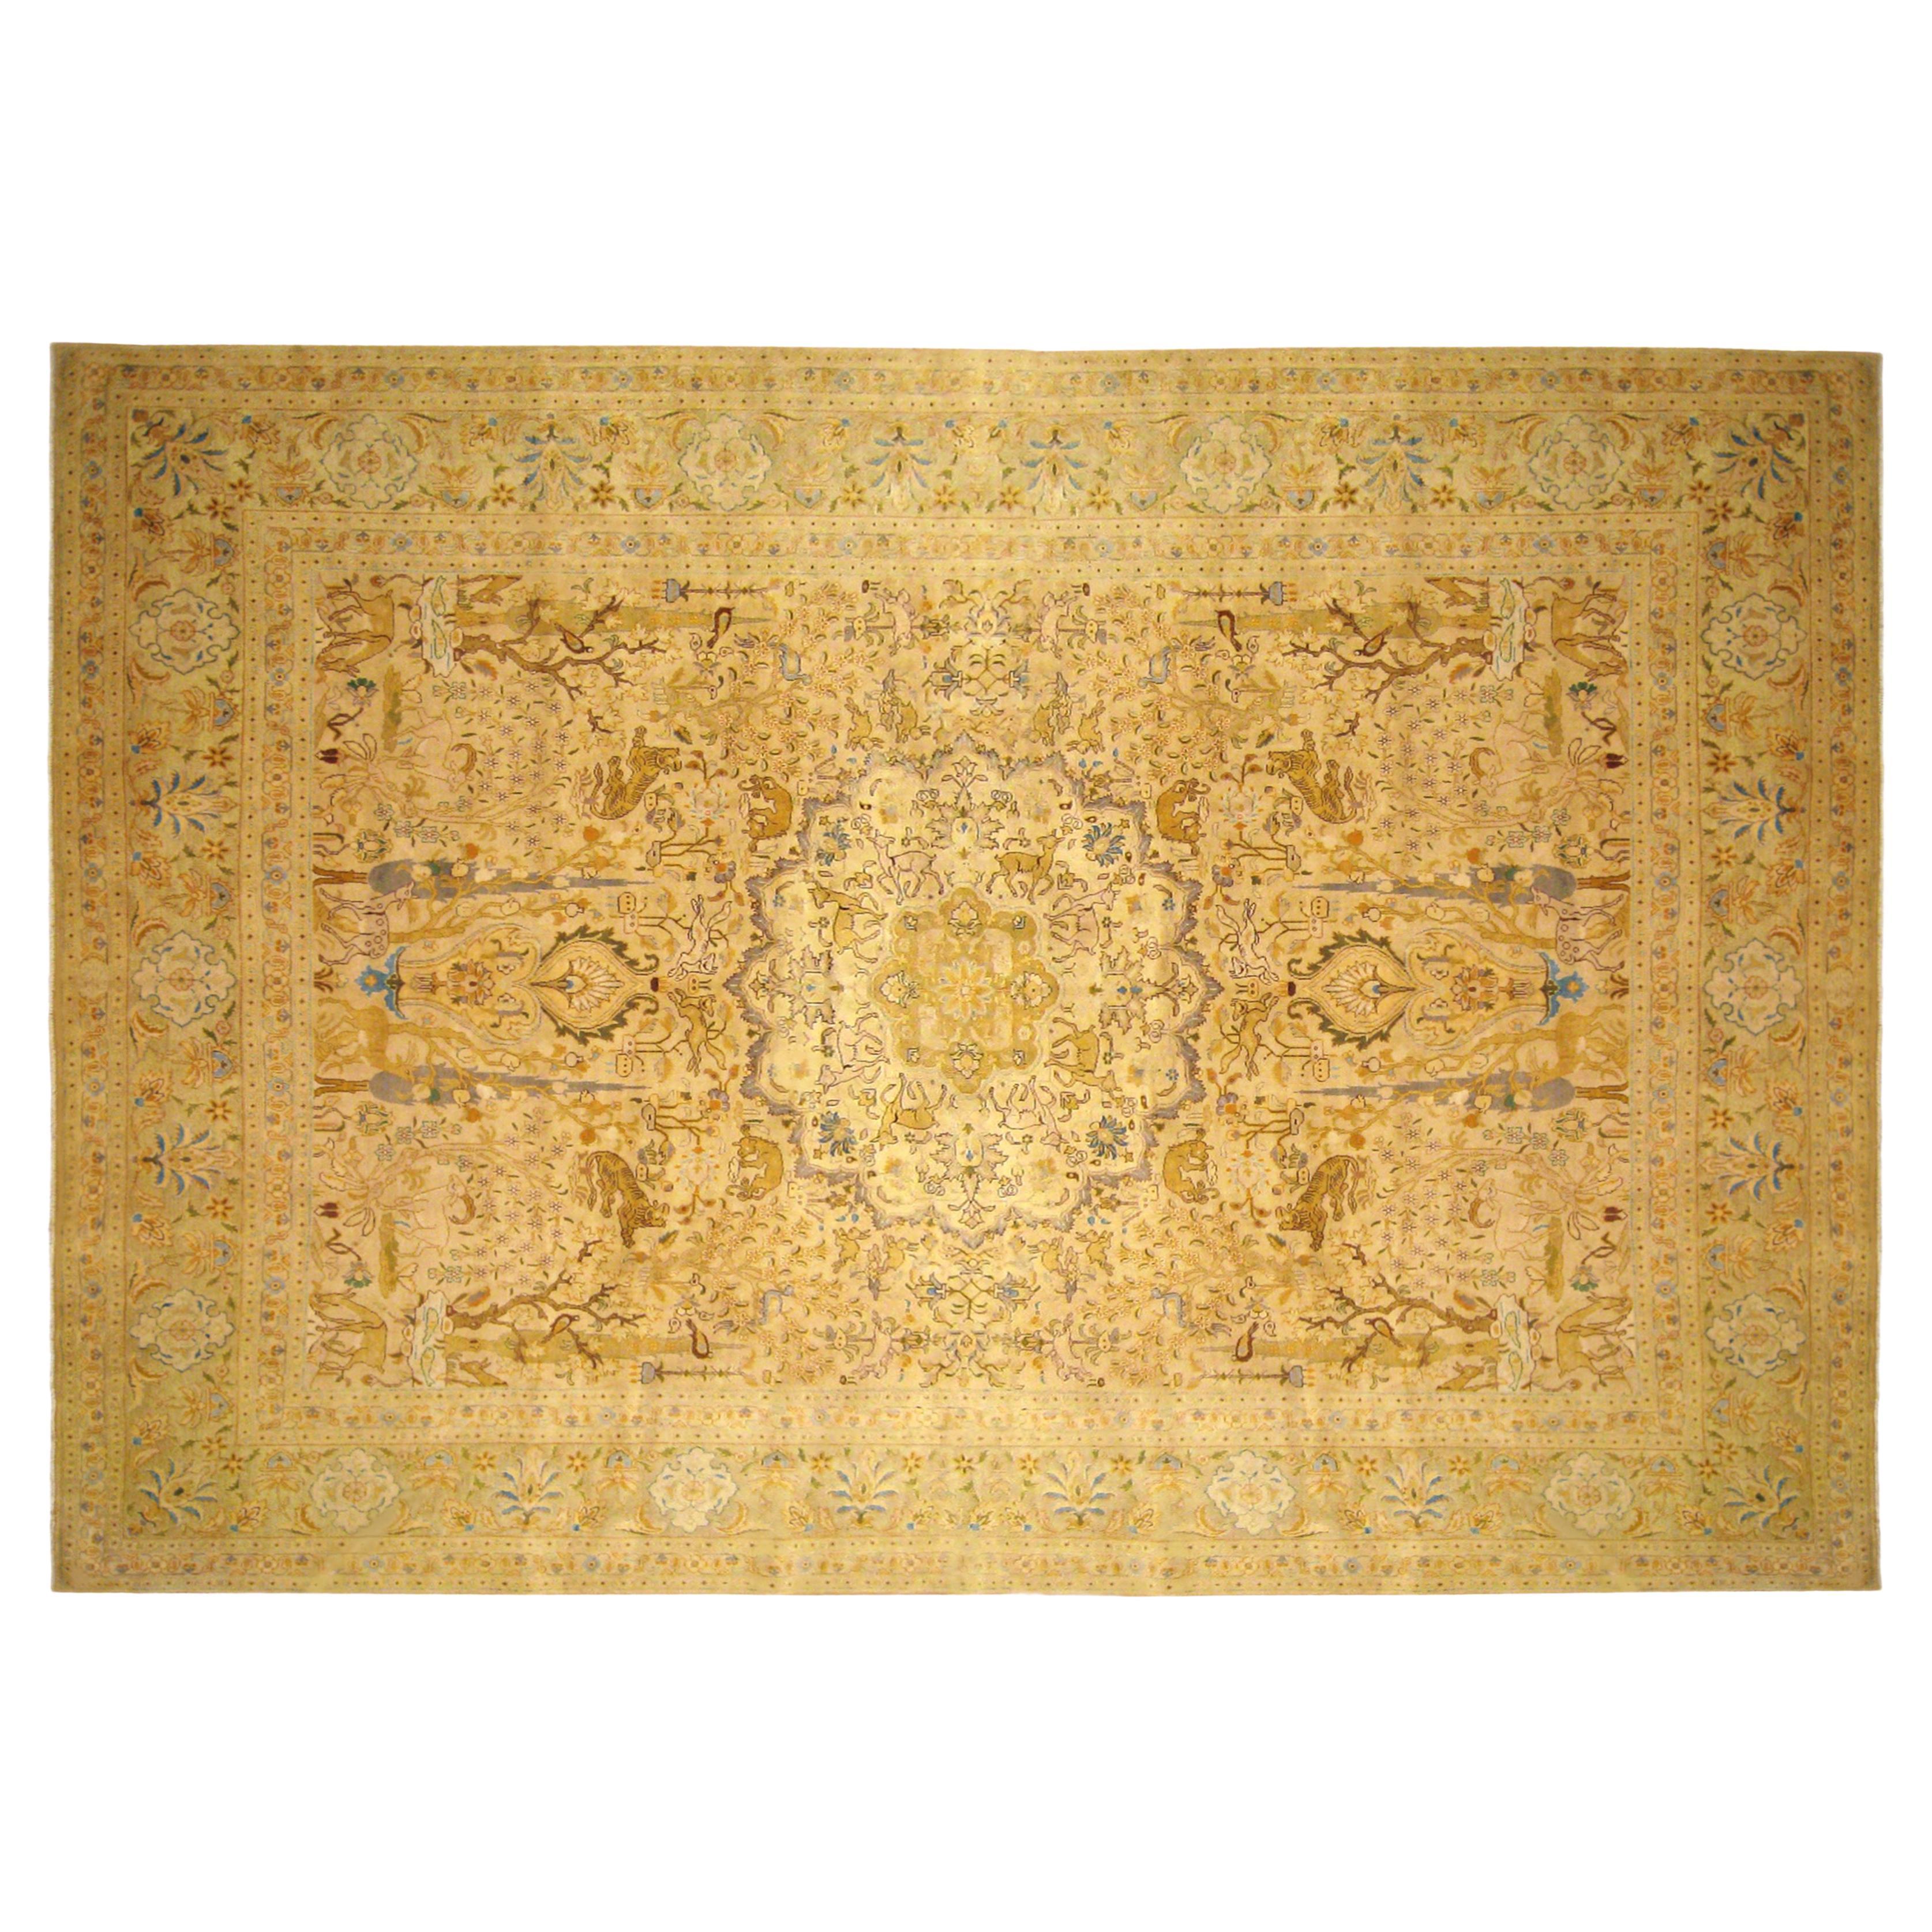 Antique Persian Tabriz Oriental Carpet in Room Size with Central Medallion